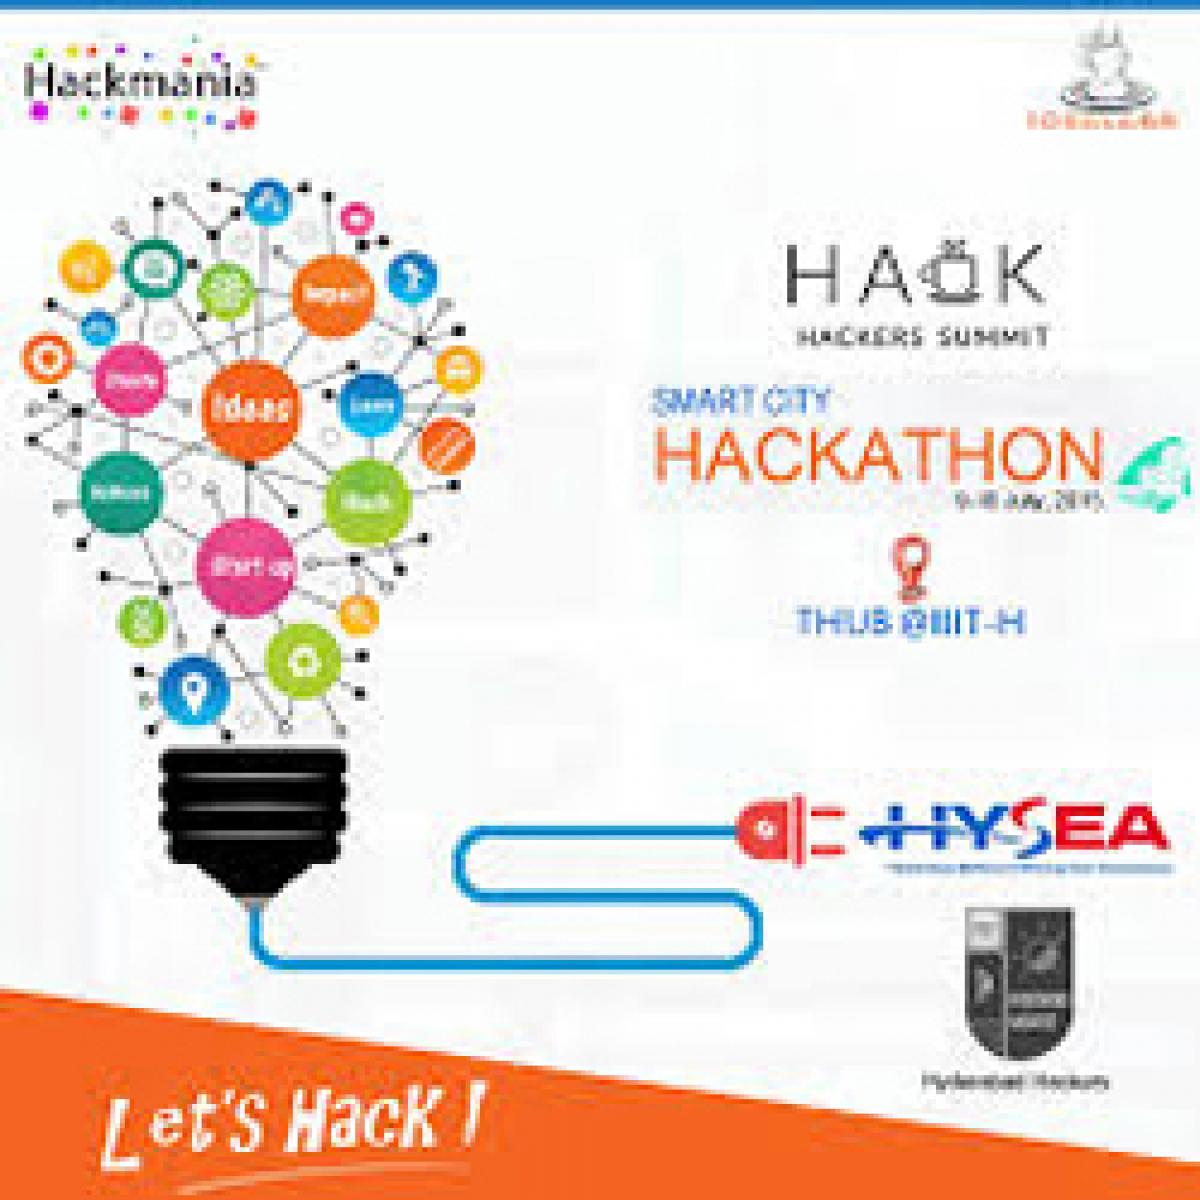 Hackers Summit in Hyderabad from today